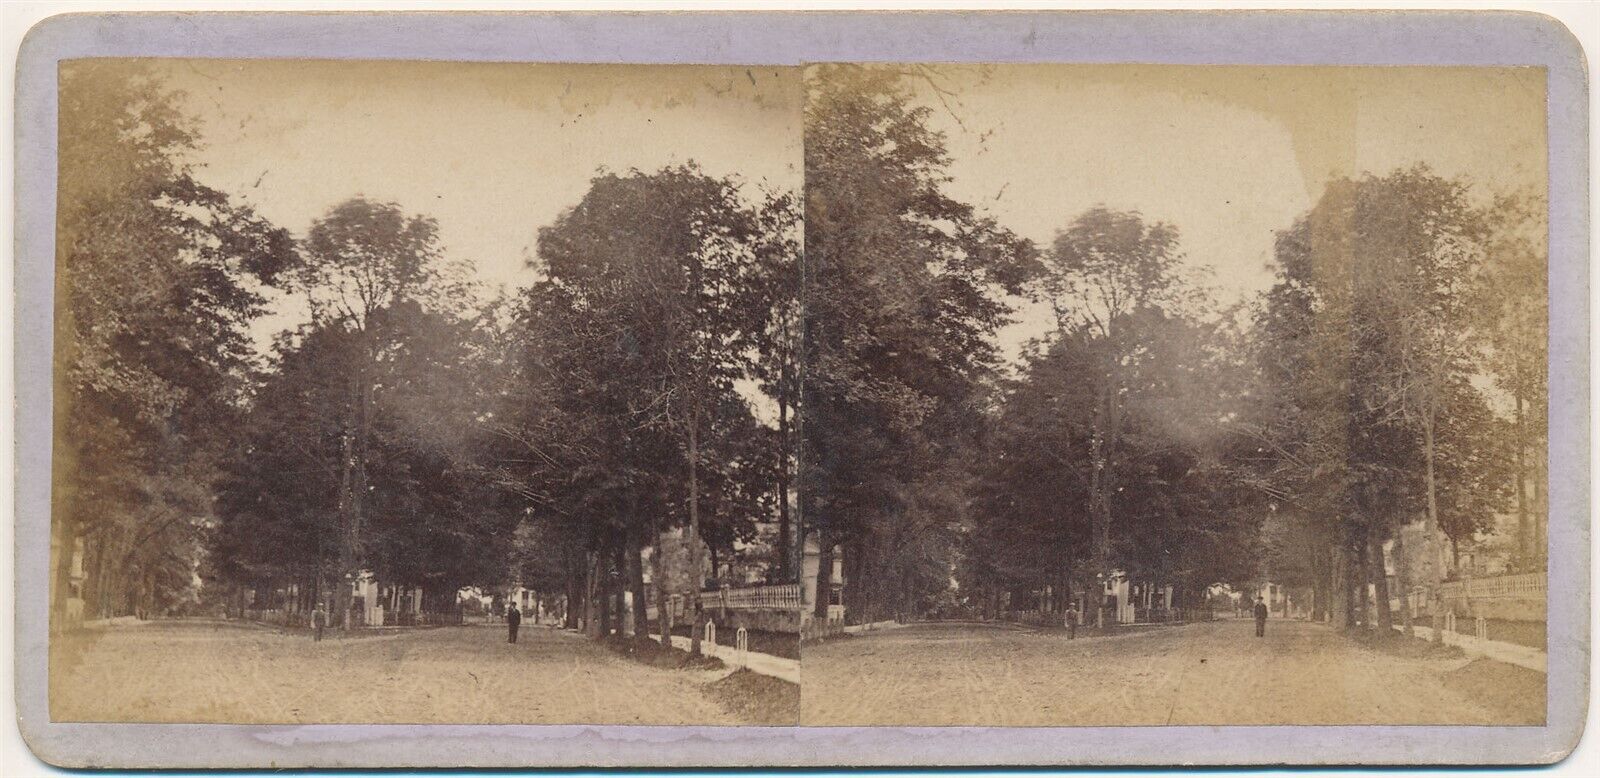 CONNECTICUT SV - Norwich - Broadway - Weekes 1870s RARE